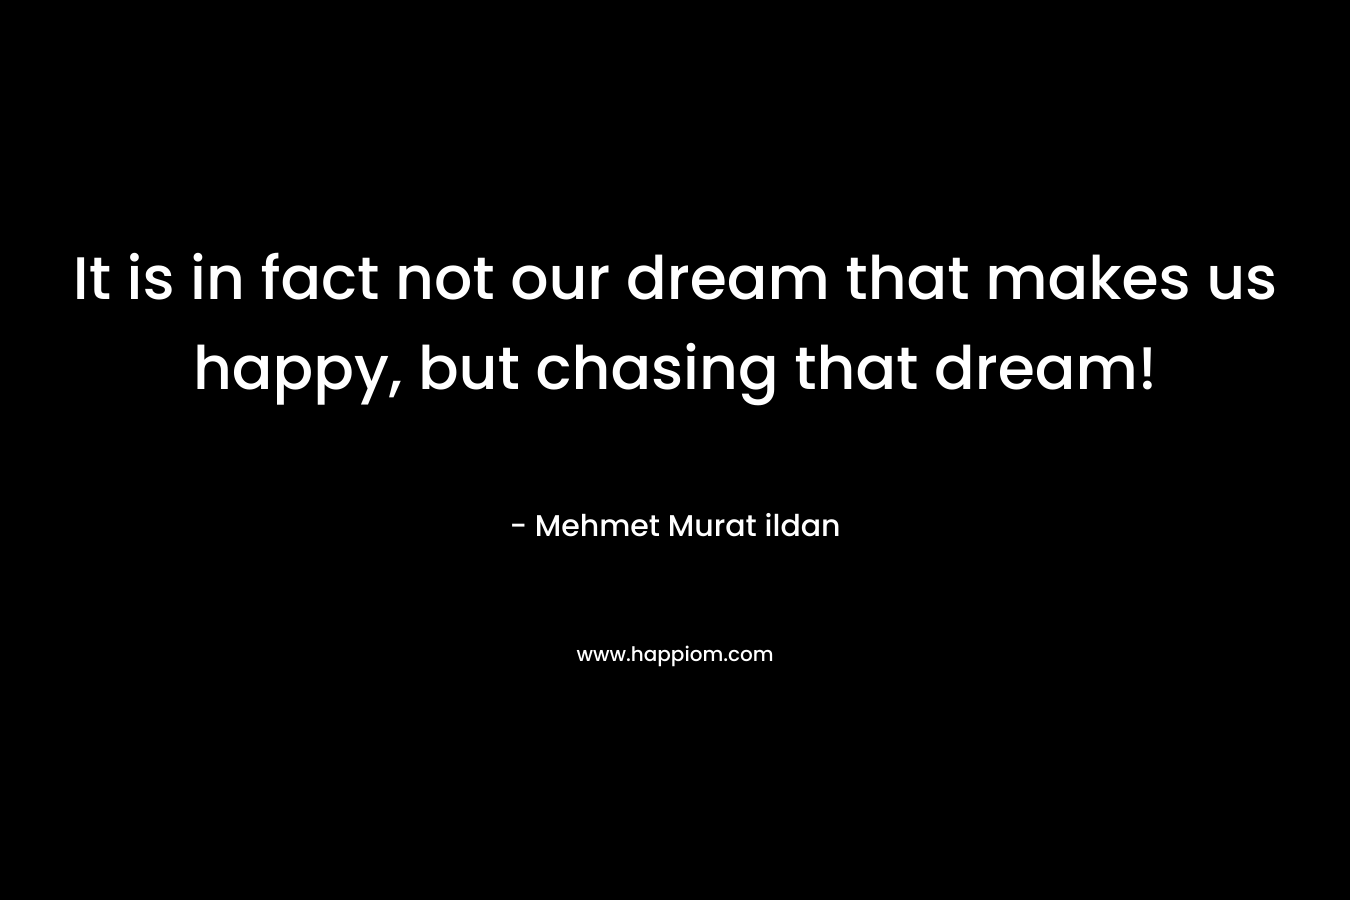 It is in fact not our dream that makes us happy, but chasing that dream!